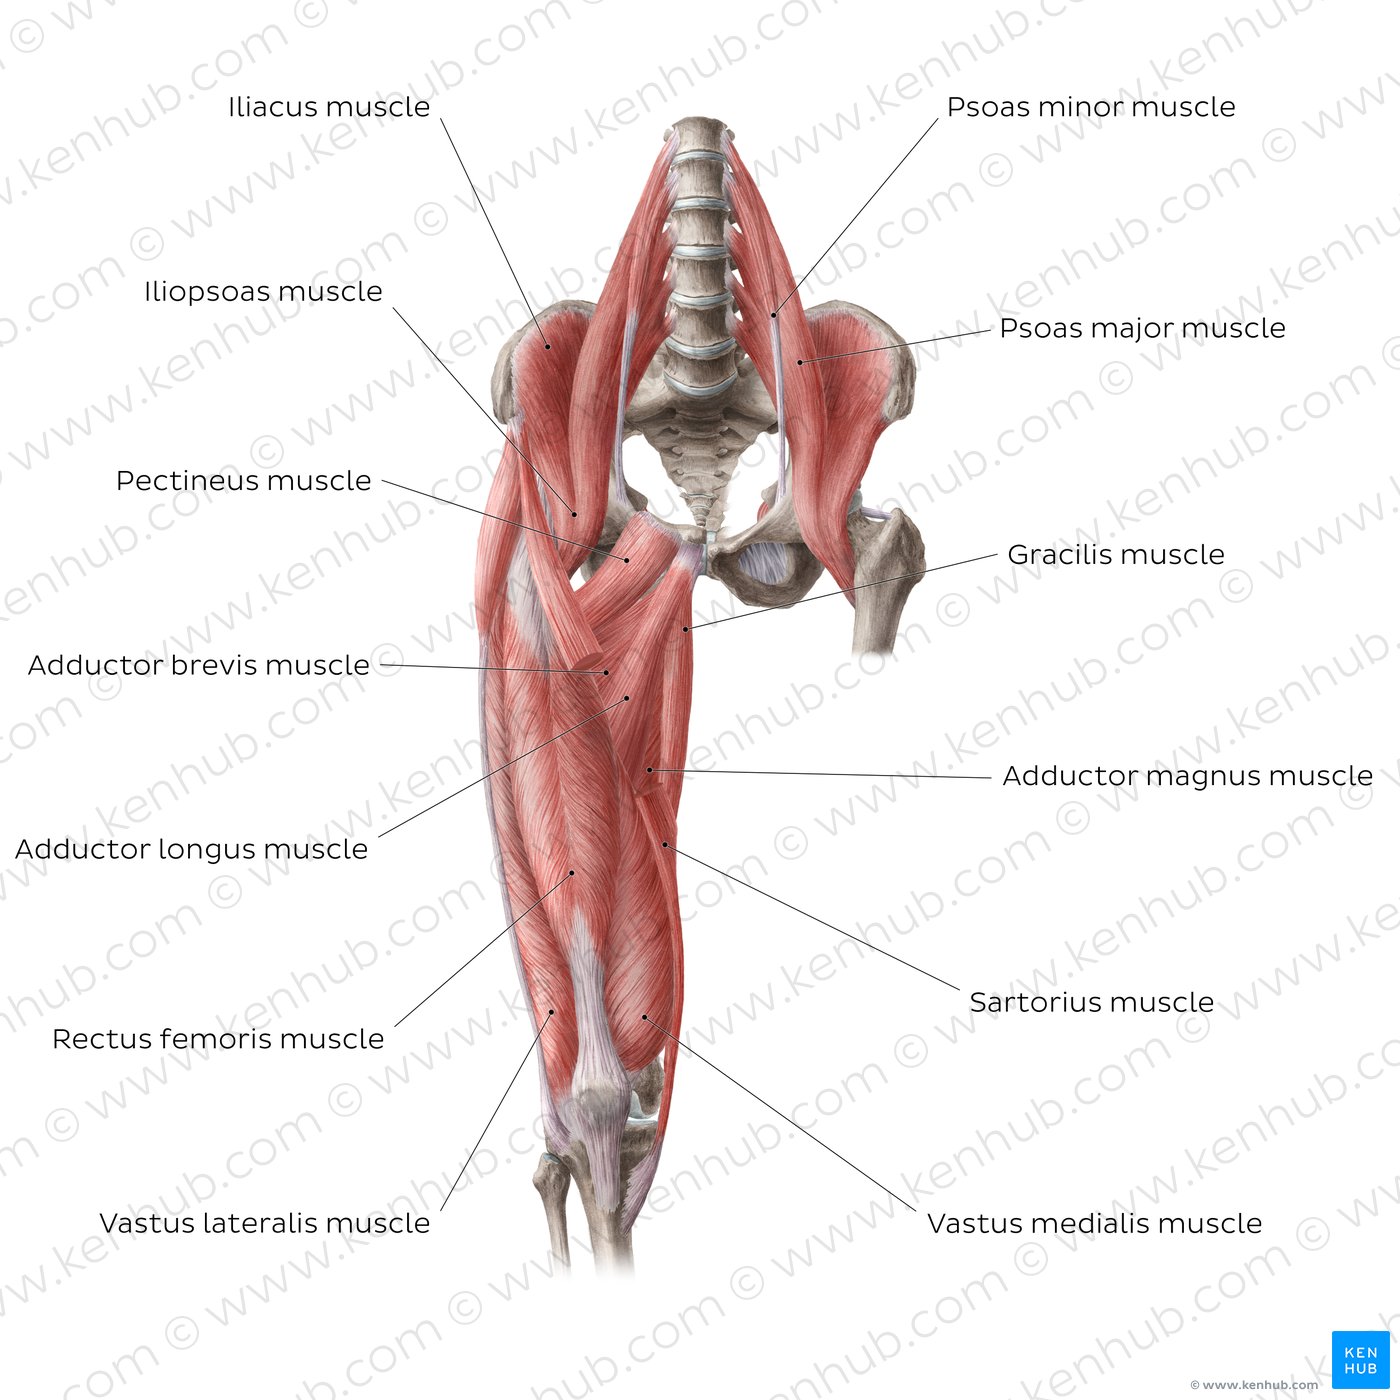 Muscles of the hip and thigh (Anterior view)